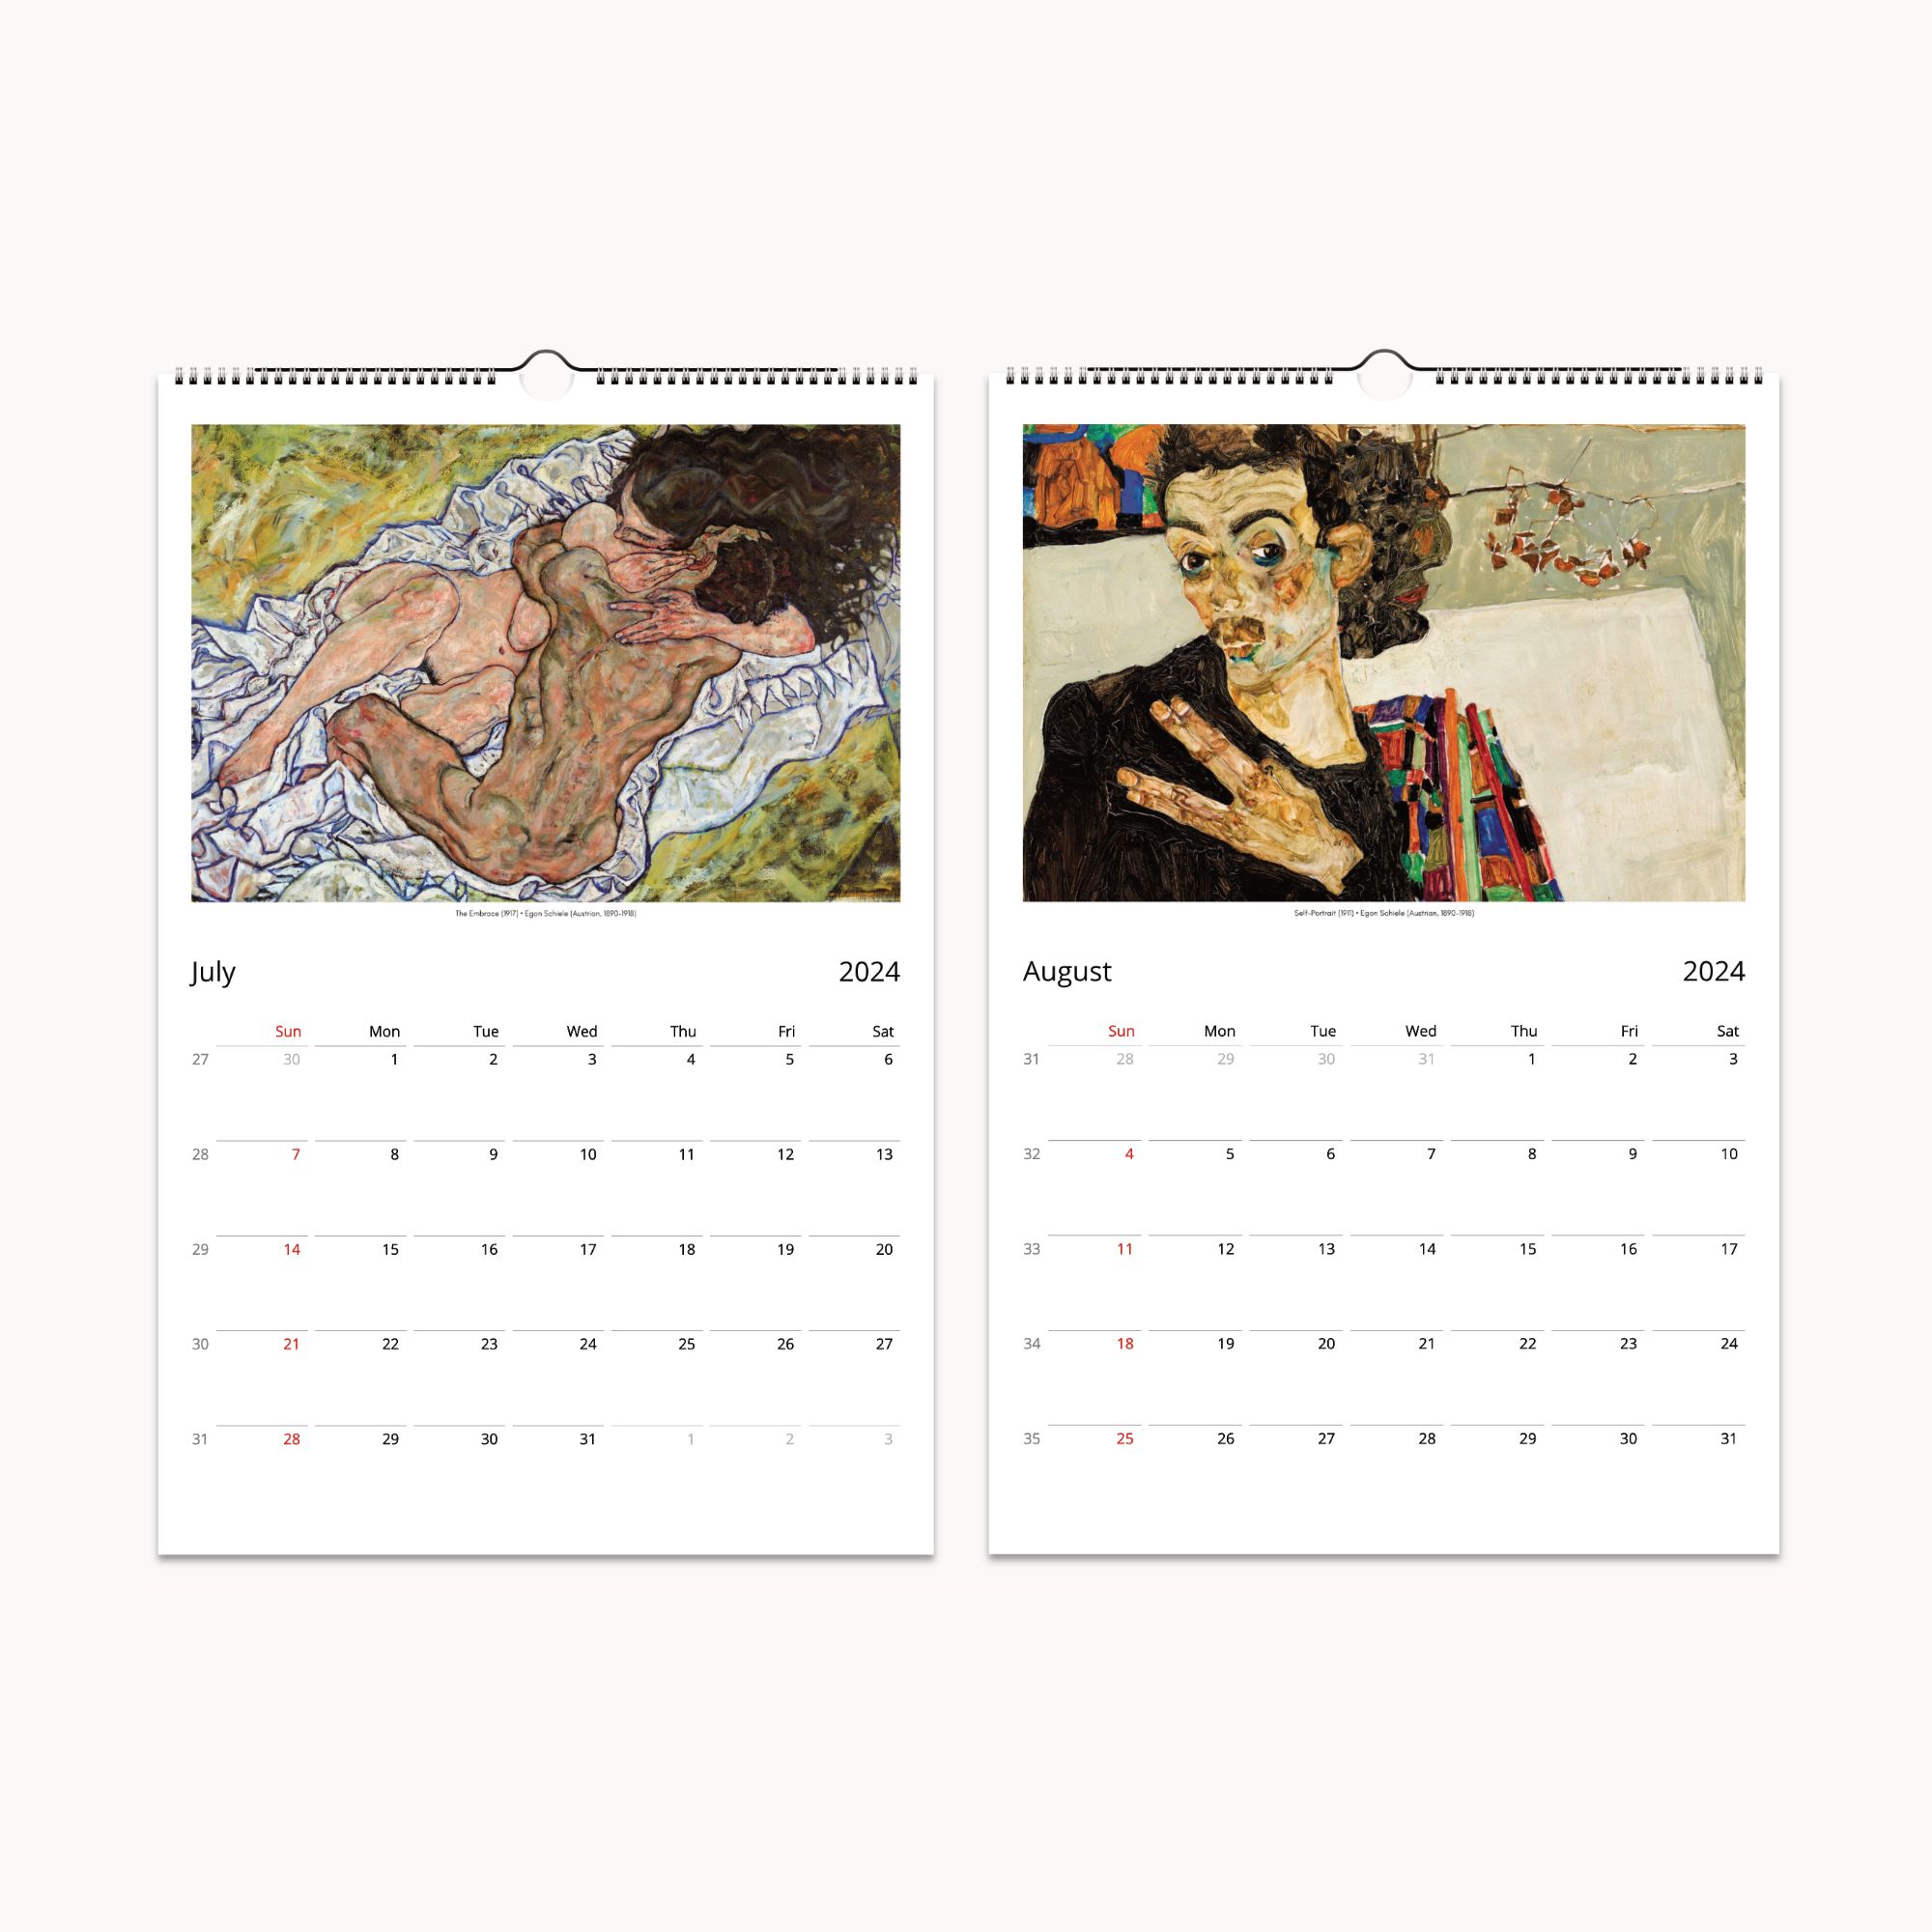 Delve into Egon Schiele's expressive mastery with a 2024 wall calendar, presenting his bold artwork on premium silk paper. Month by month, embrace the intensity of his vision in your everyday space.